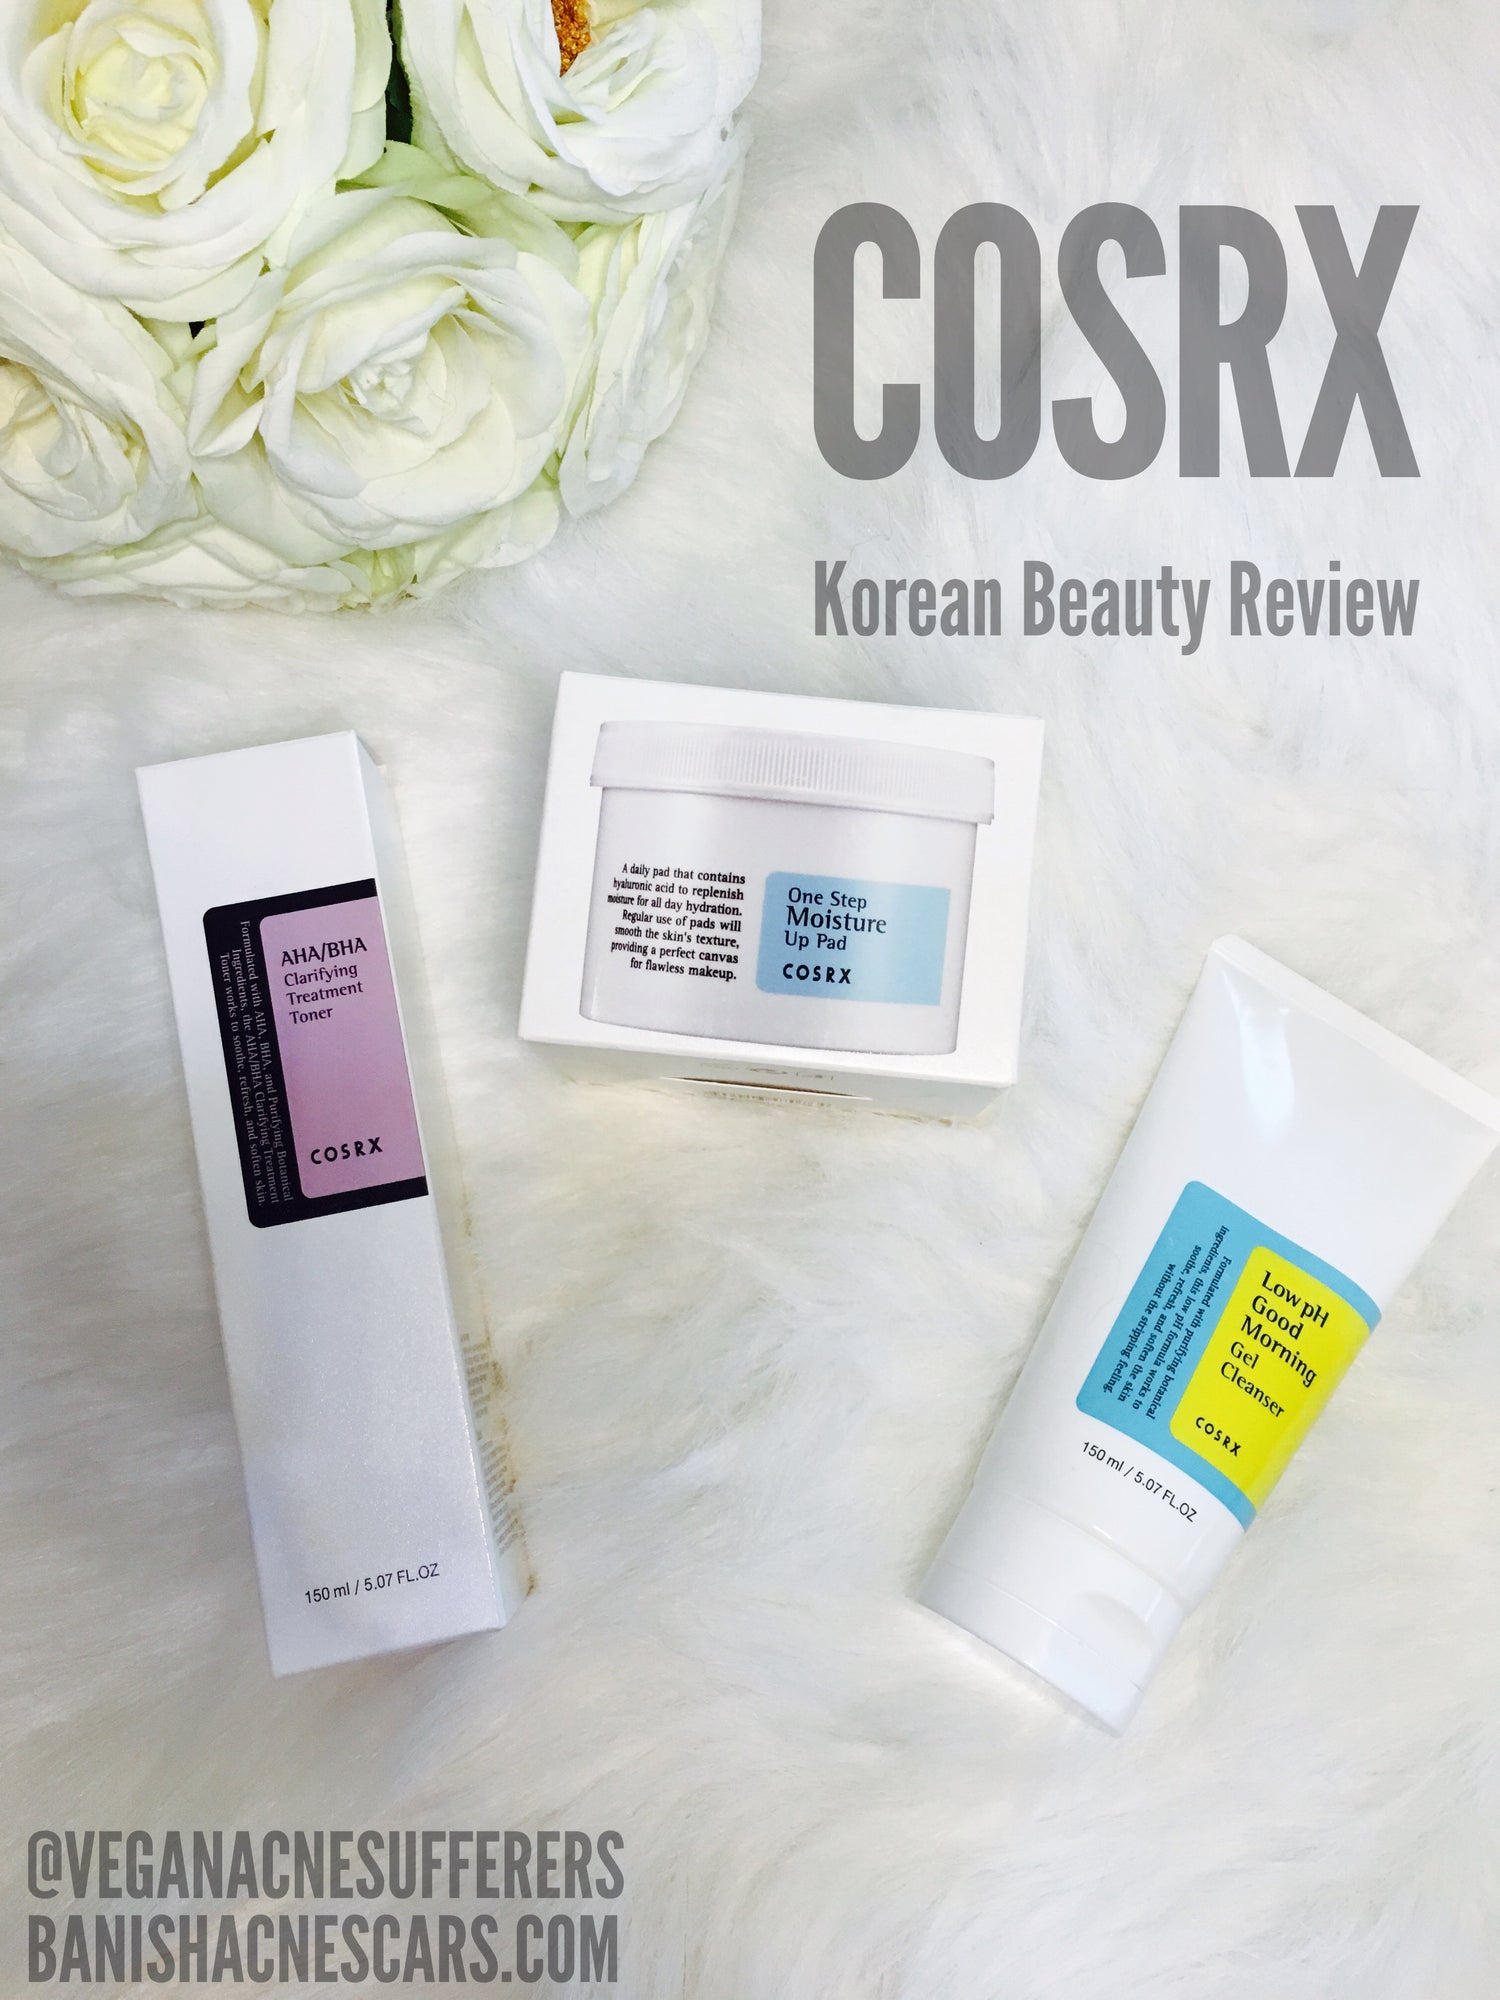 COSRX Review: You'll Love This Amazing & Cheap Korean Skincare Line